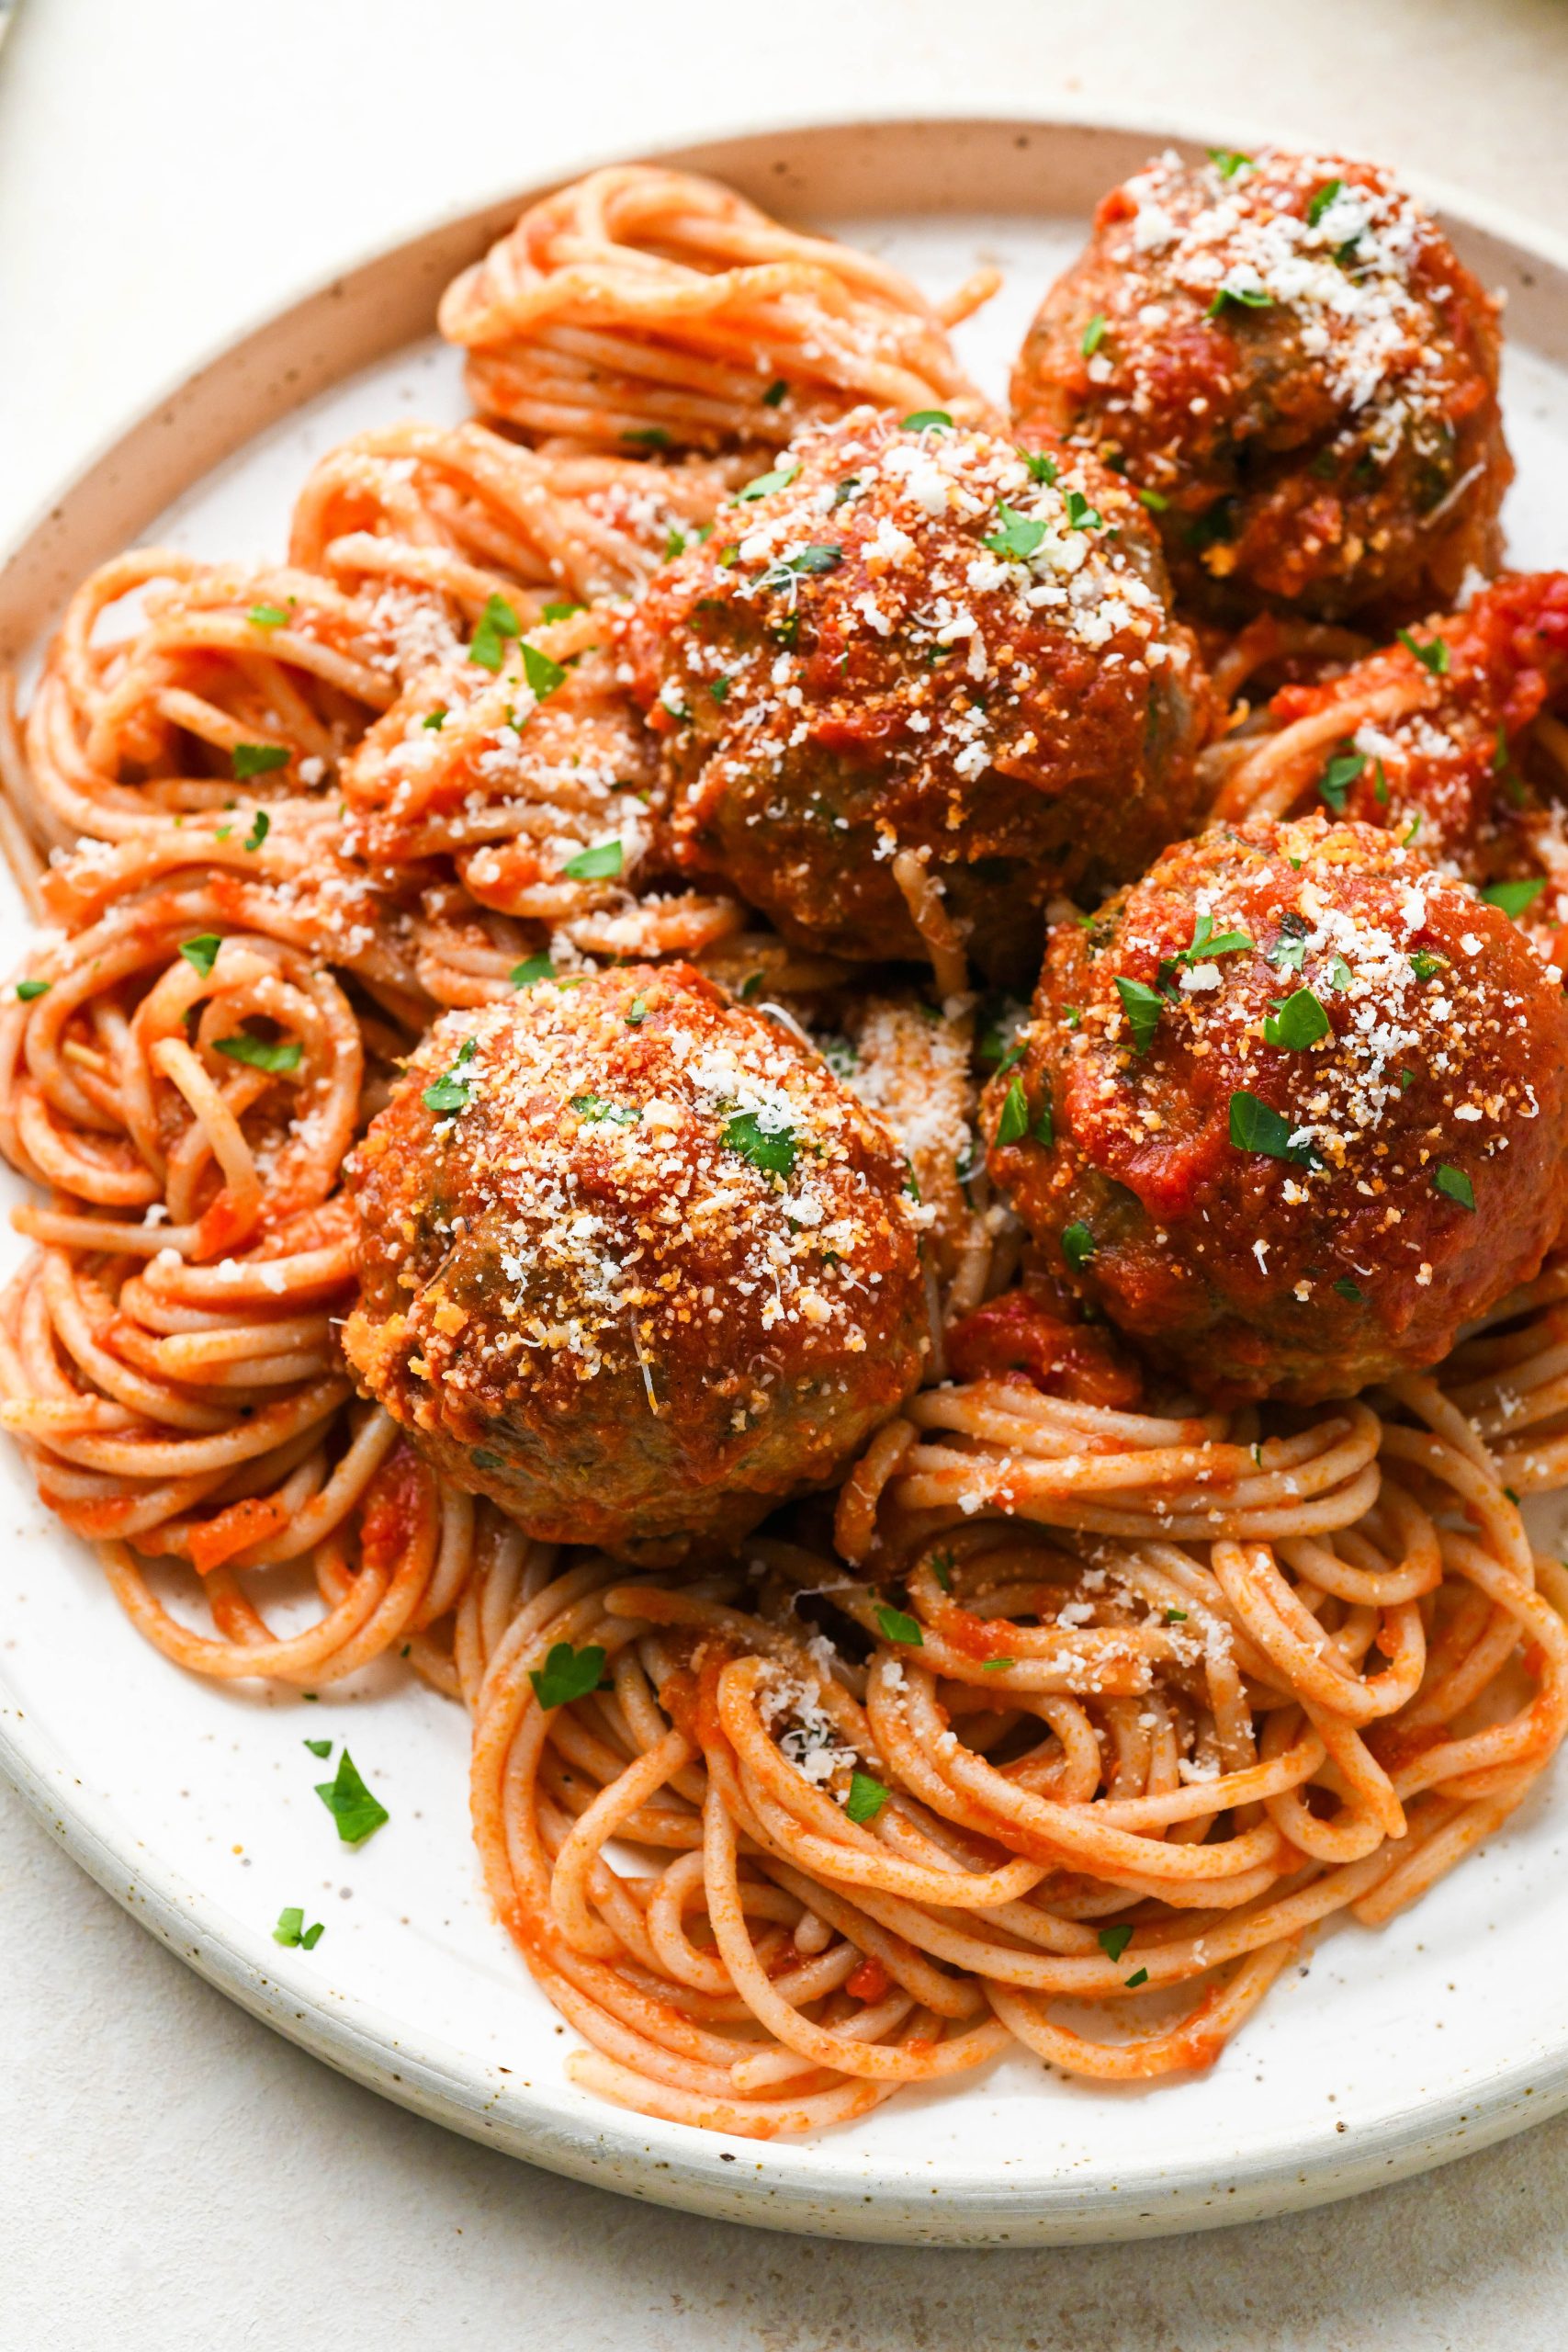 Gluten free meatballs on top of twirled gluten free spaghetti that has been tossed in marinara sauce. Topped with grated parmesan and fresh parsley.